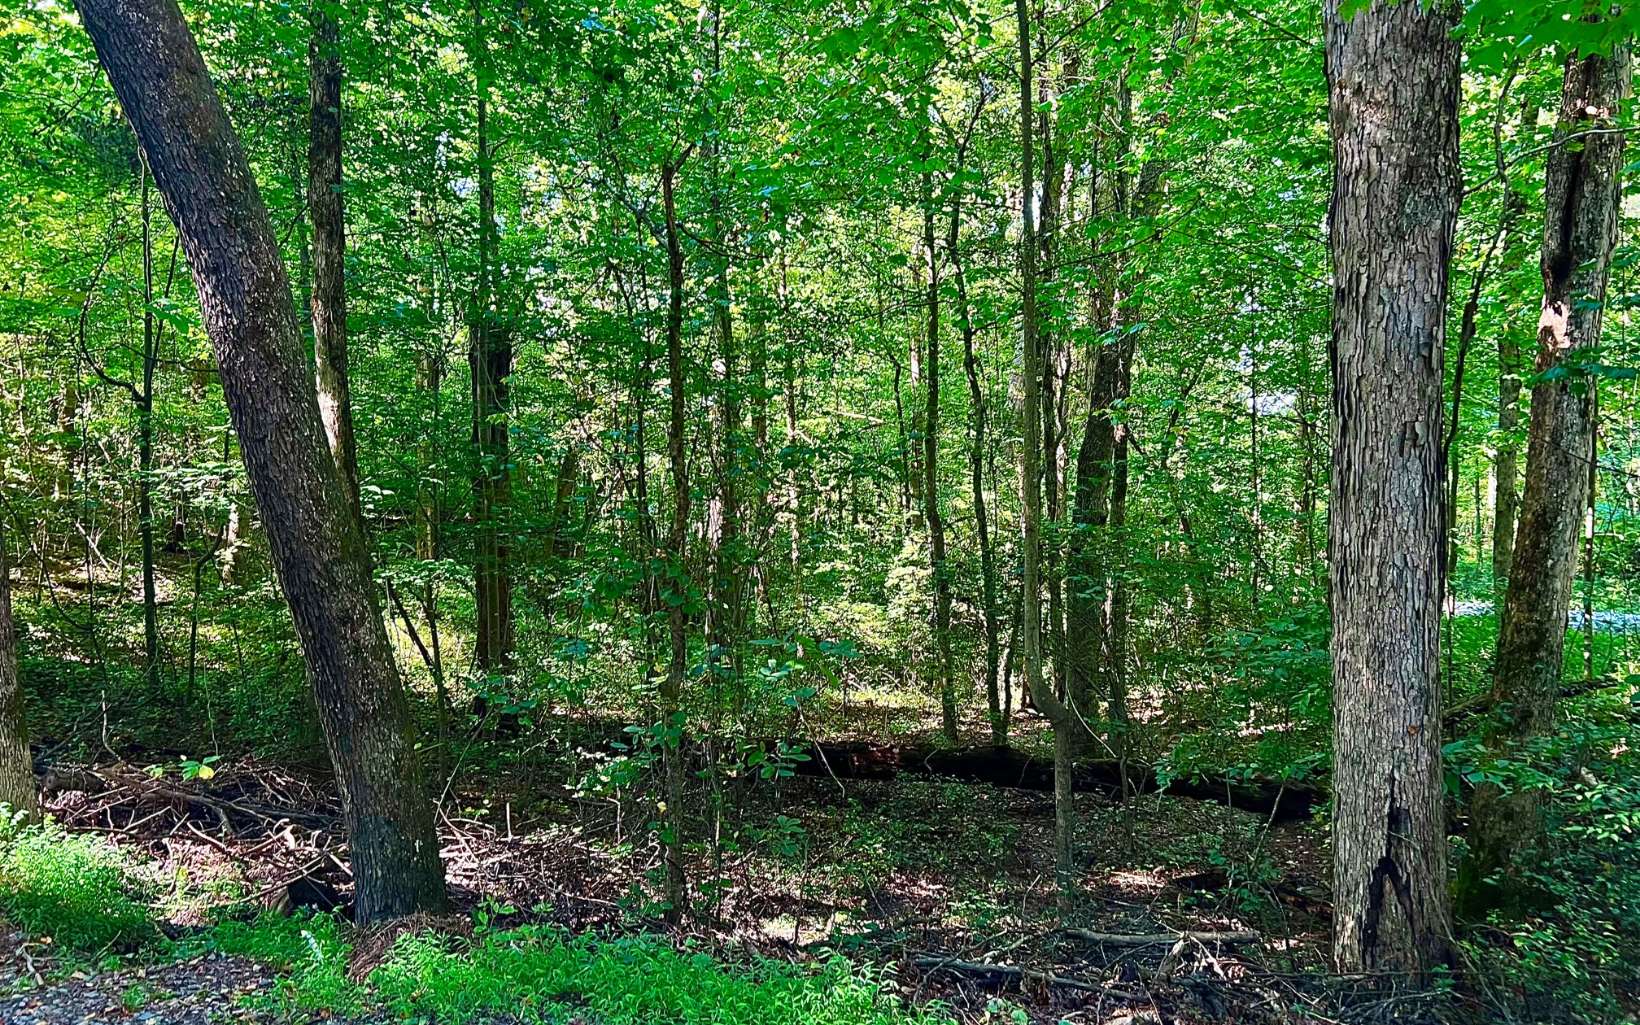 Looking for a BEAUTIFUL and FLAT lot in Ellijay that is less than 10 minutes from Downtown Ellijay? Look no further! This beautiful lot is ready for you to come and build now! County Water available, Great cell service, High Speed Internet available, Telephone available! Conveniently located near many Apple Orchards and Wineries in Ellijay! Ask for our local builder info and get started today! Mostly unrestricted lot with few restrictions, No mobile homes allowed and minimum of 1,000 sq ft. See links in documents for full C & R. Lot is right across from 59 Lakeview Court, Ellijay GA 30540.Soil work completed! The soil scientist said the lot should approve for a 3 bedroom and possibly a 4th! See links and docs for soil report.